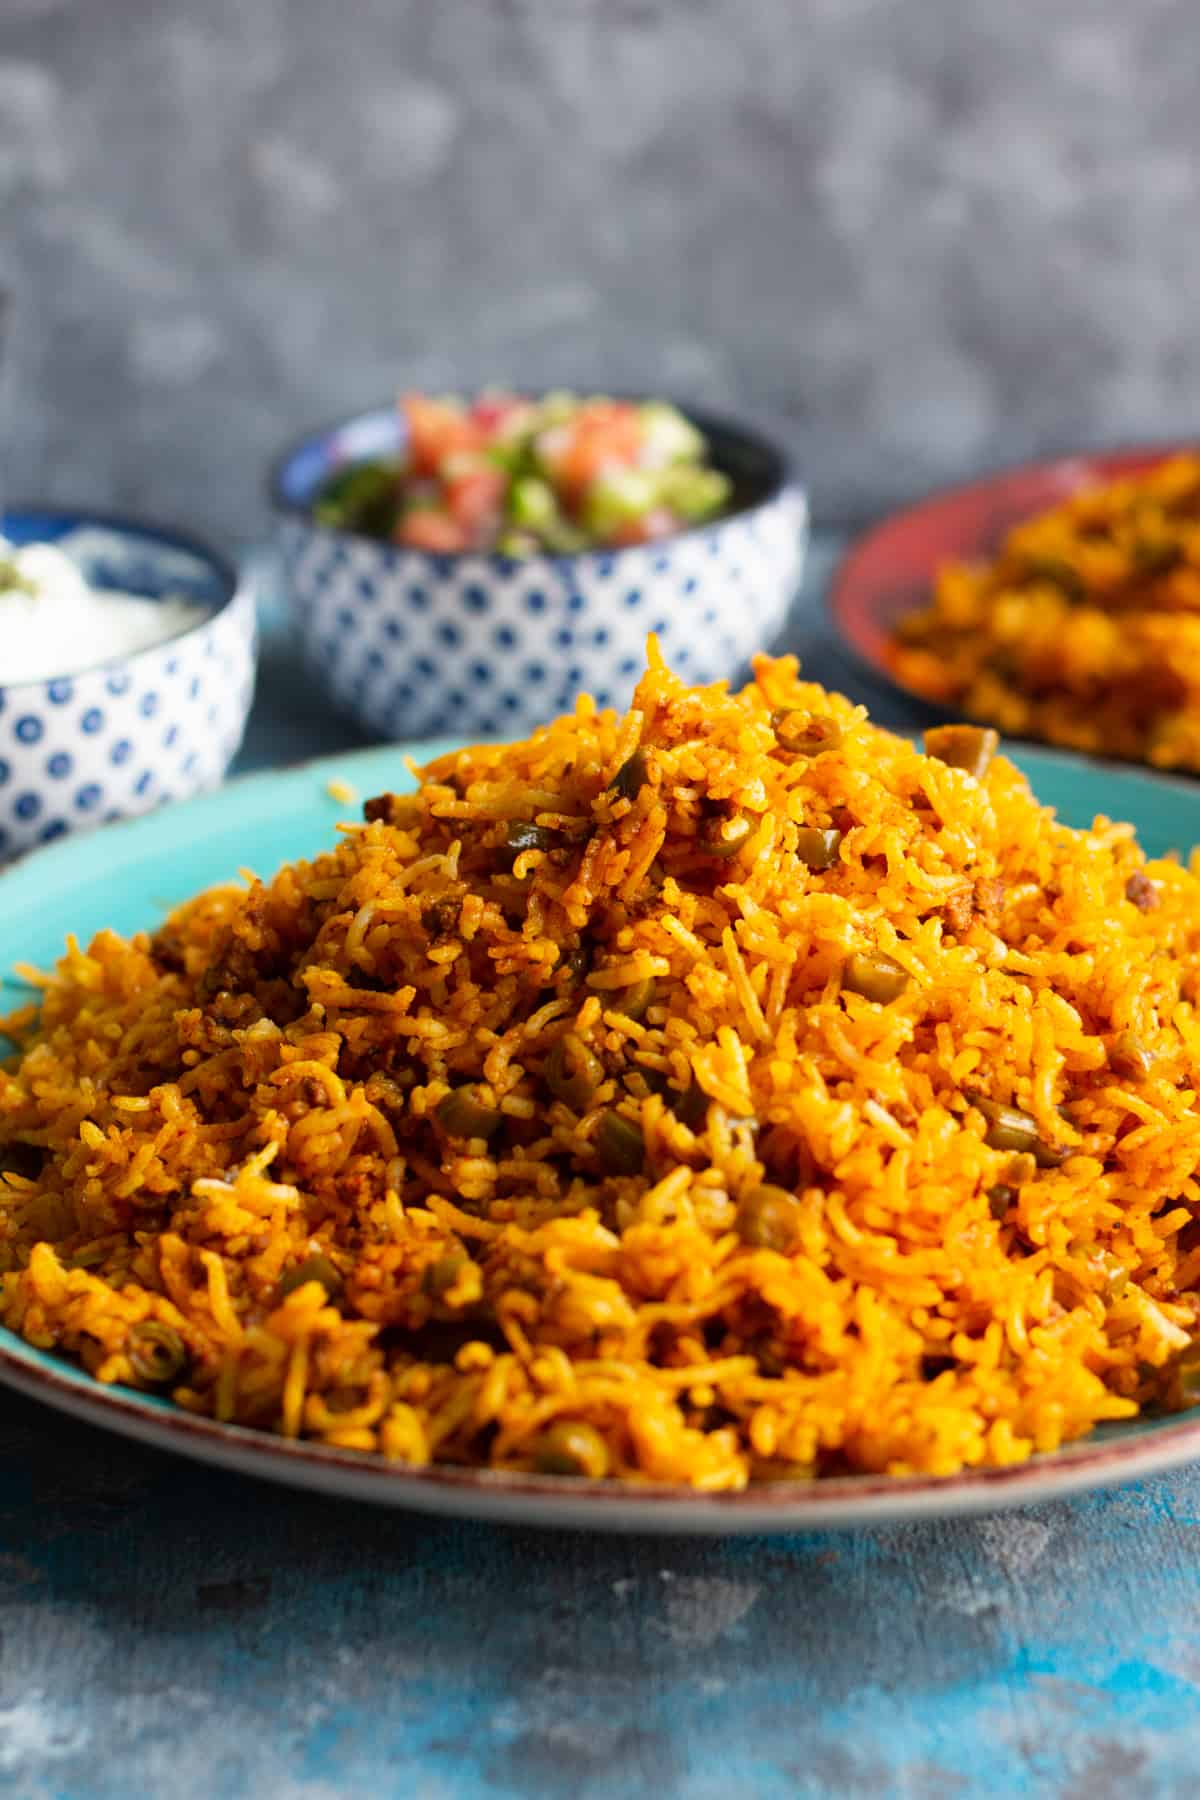 Lubia polo is a delicious Persian green bean rice dish made with fresh ingredients. Learn how to make lubia polo at home and enjoy a Persian feast.